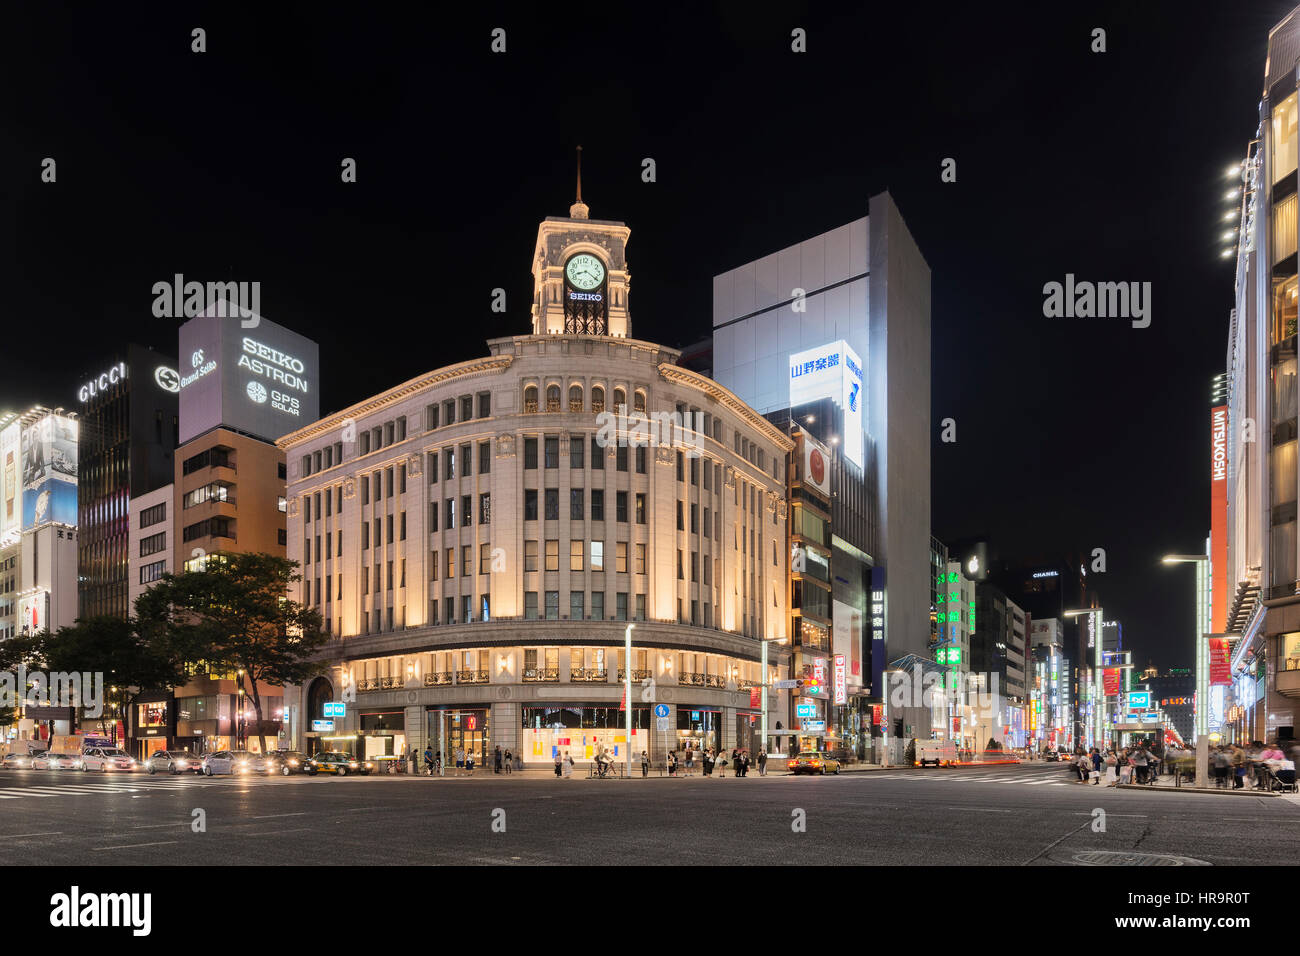 The Ginza is Tokyo's most famous upmarket shopping, dining and entertainment district, featuring numerous department stores, boutiques, art galleries, Stock Photo